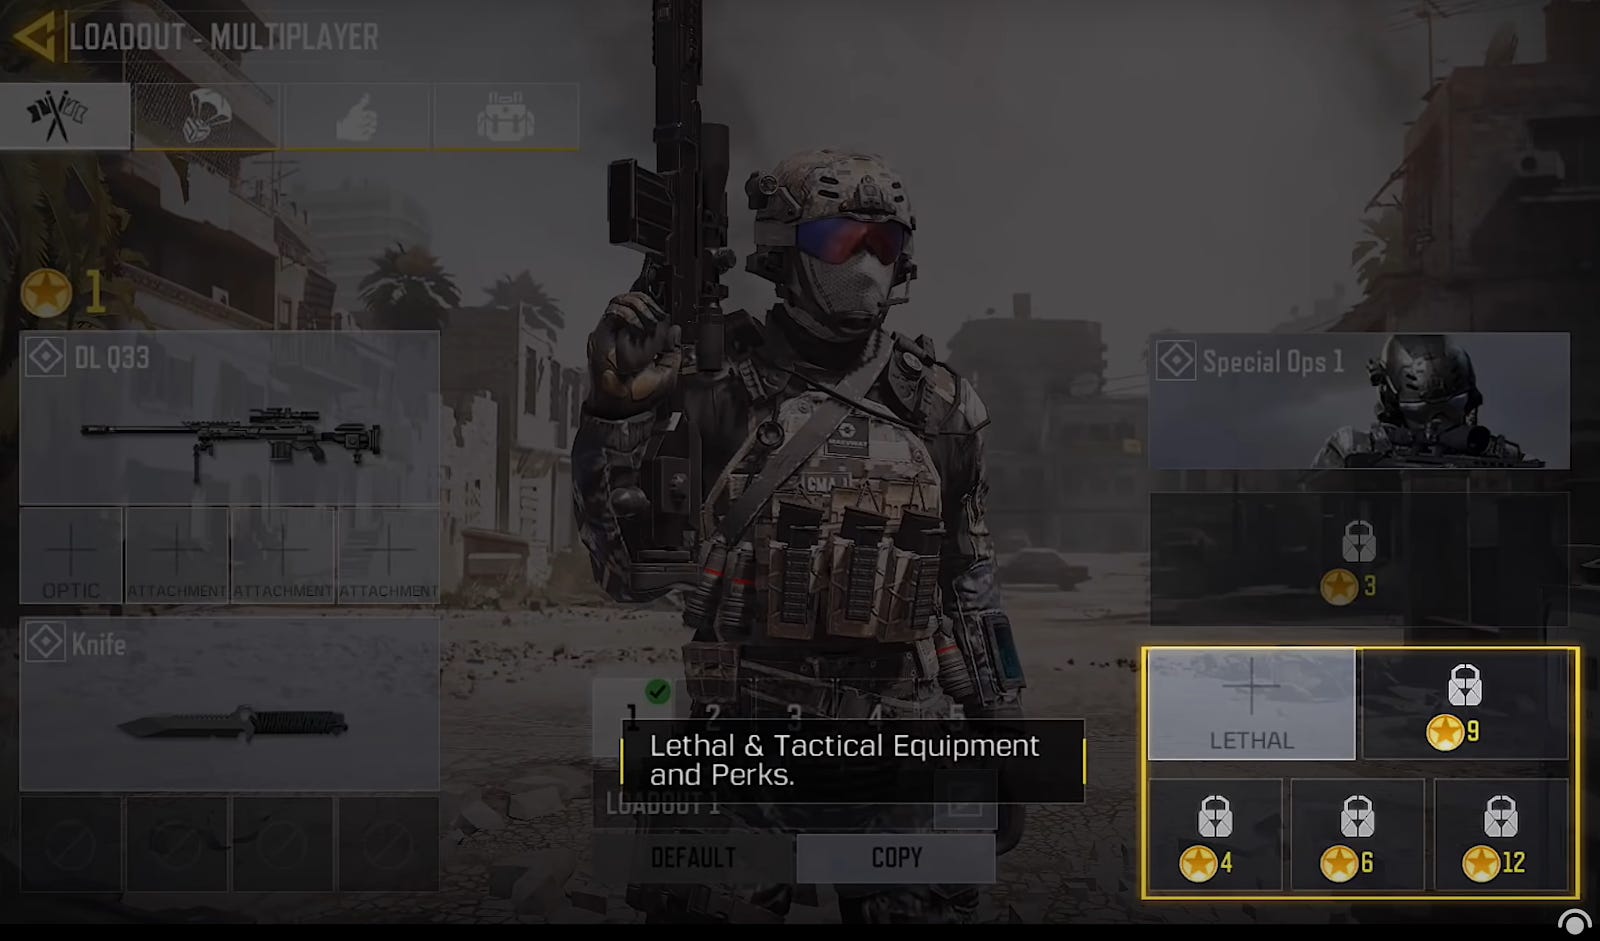 Introducing a game-changing FREE-TO-PLAY experience - Call of Duty